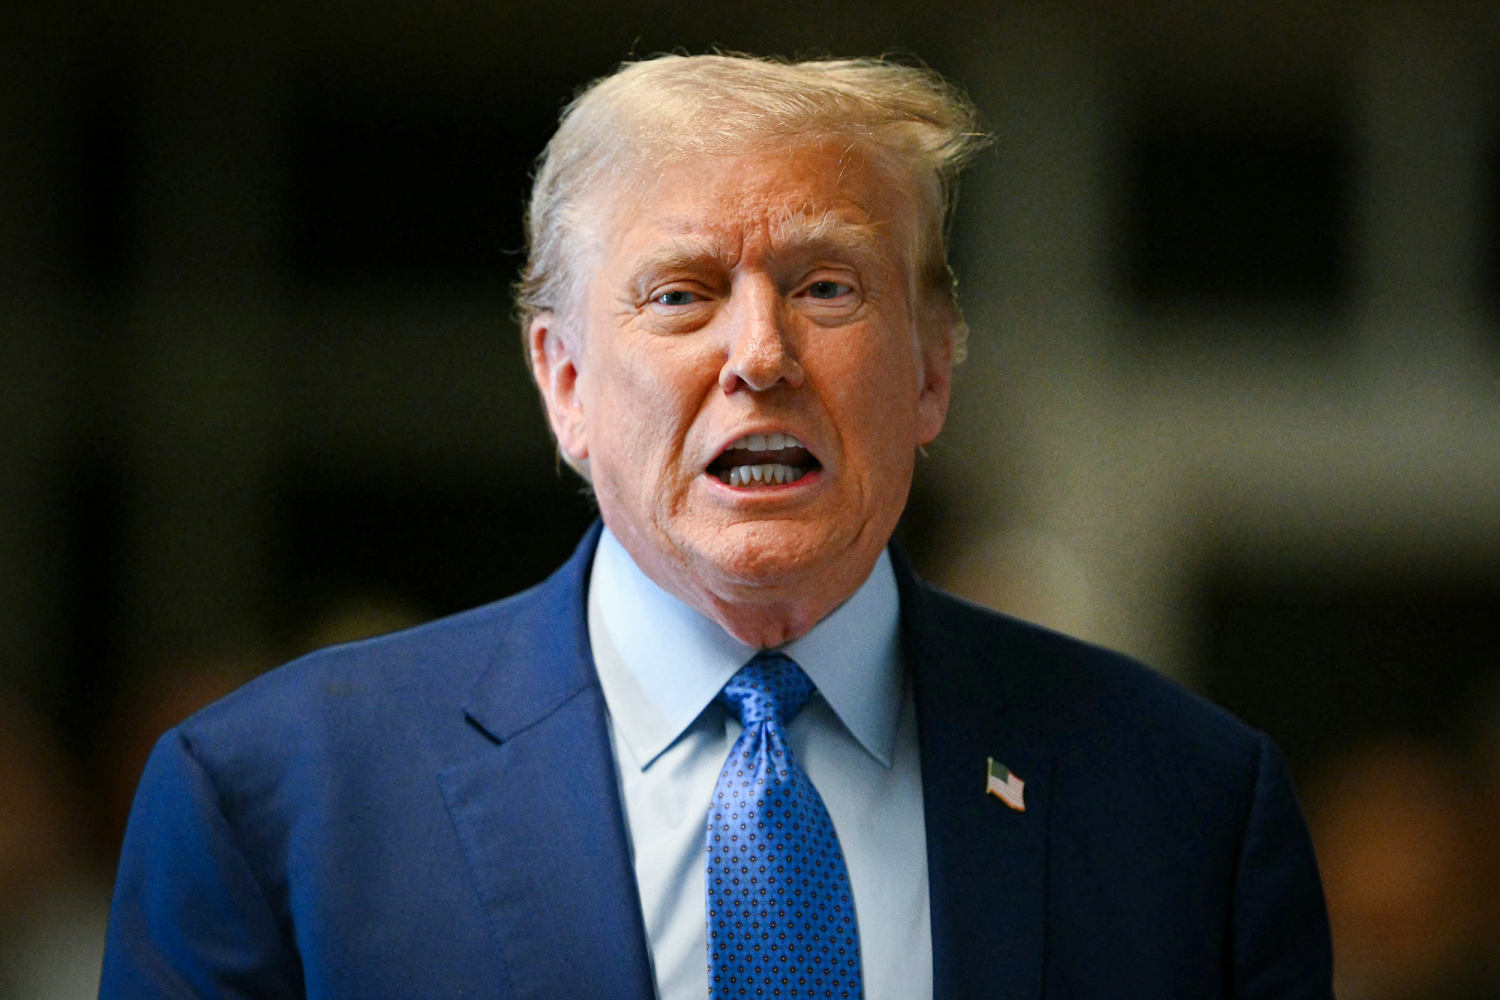 Trump criticizes Jewish Democrats as he attacks Biden over threat to withhold U.S. weapons to Israel